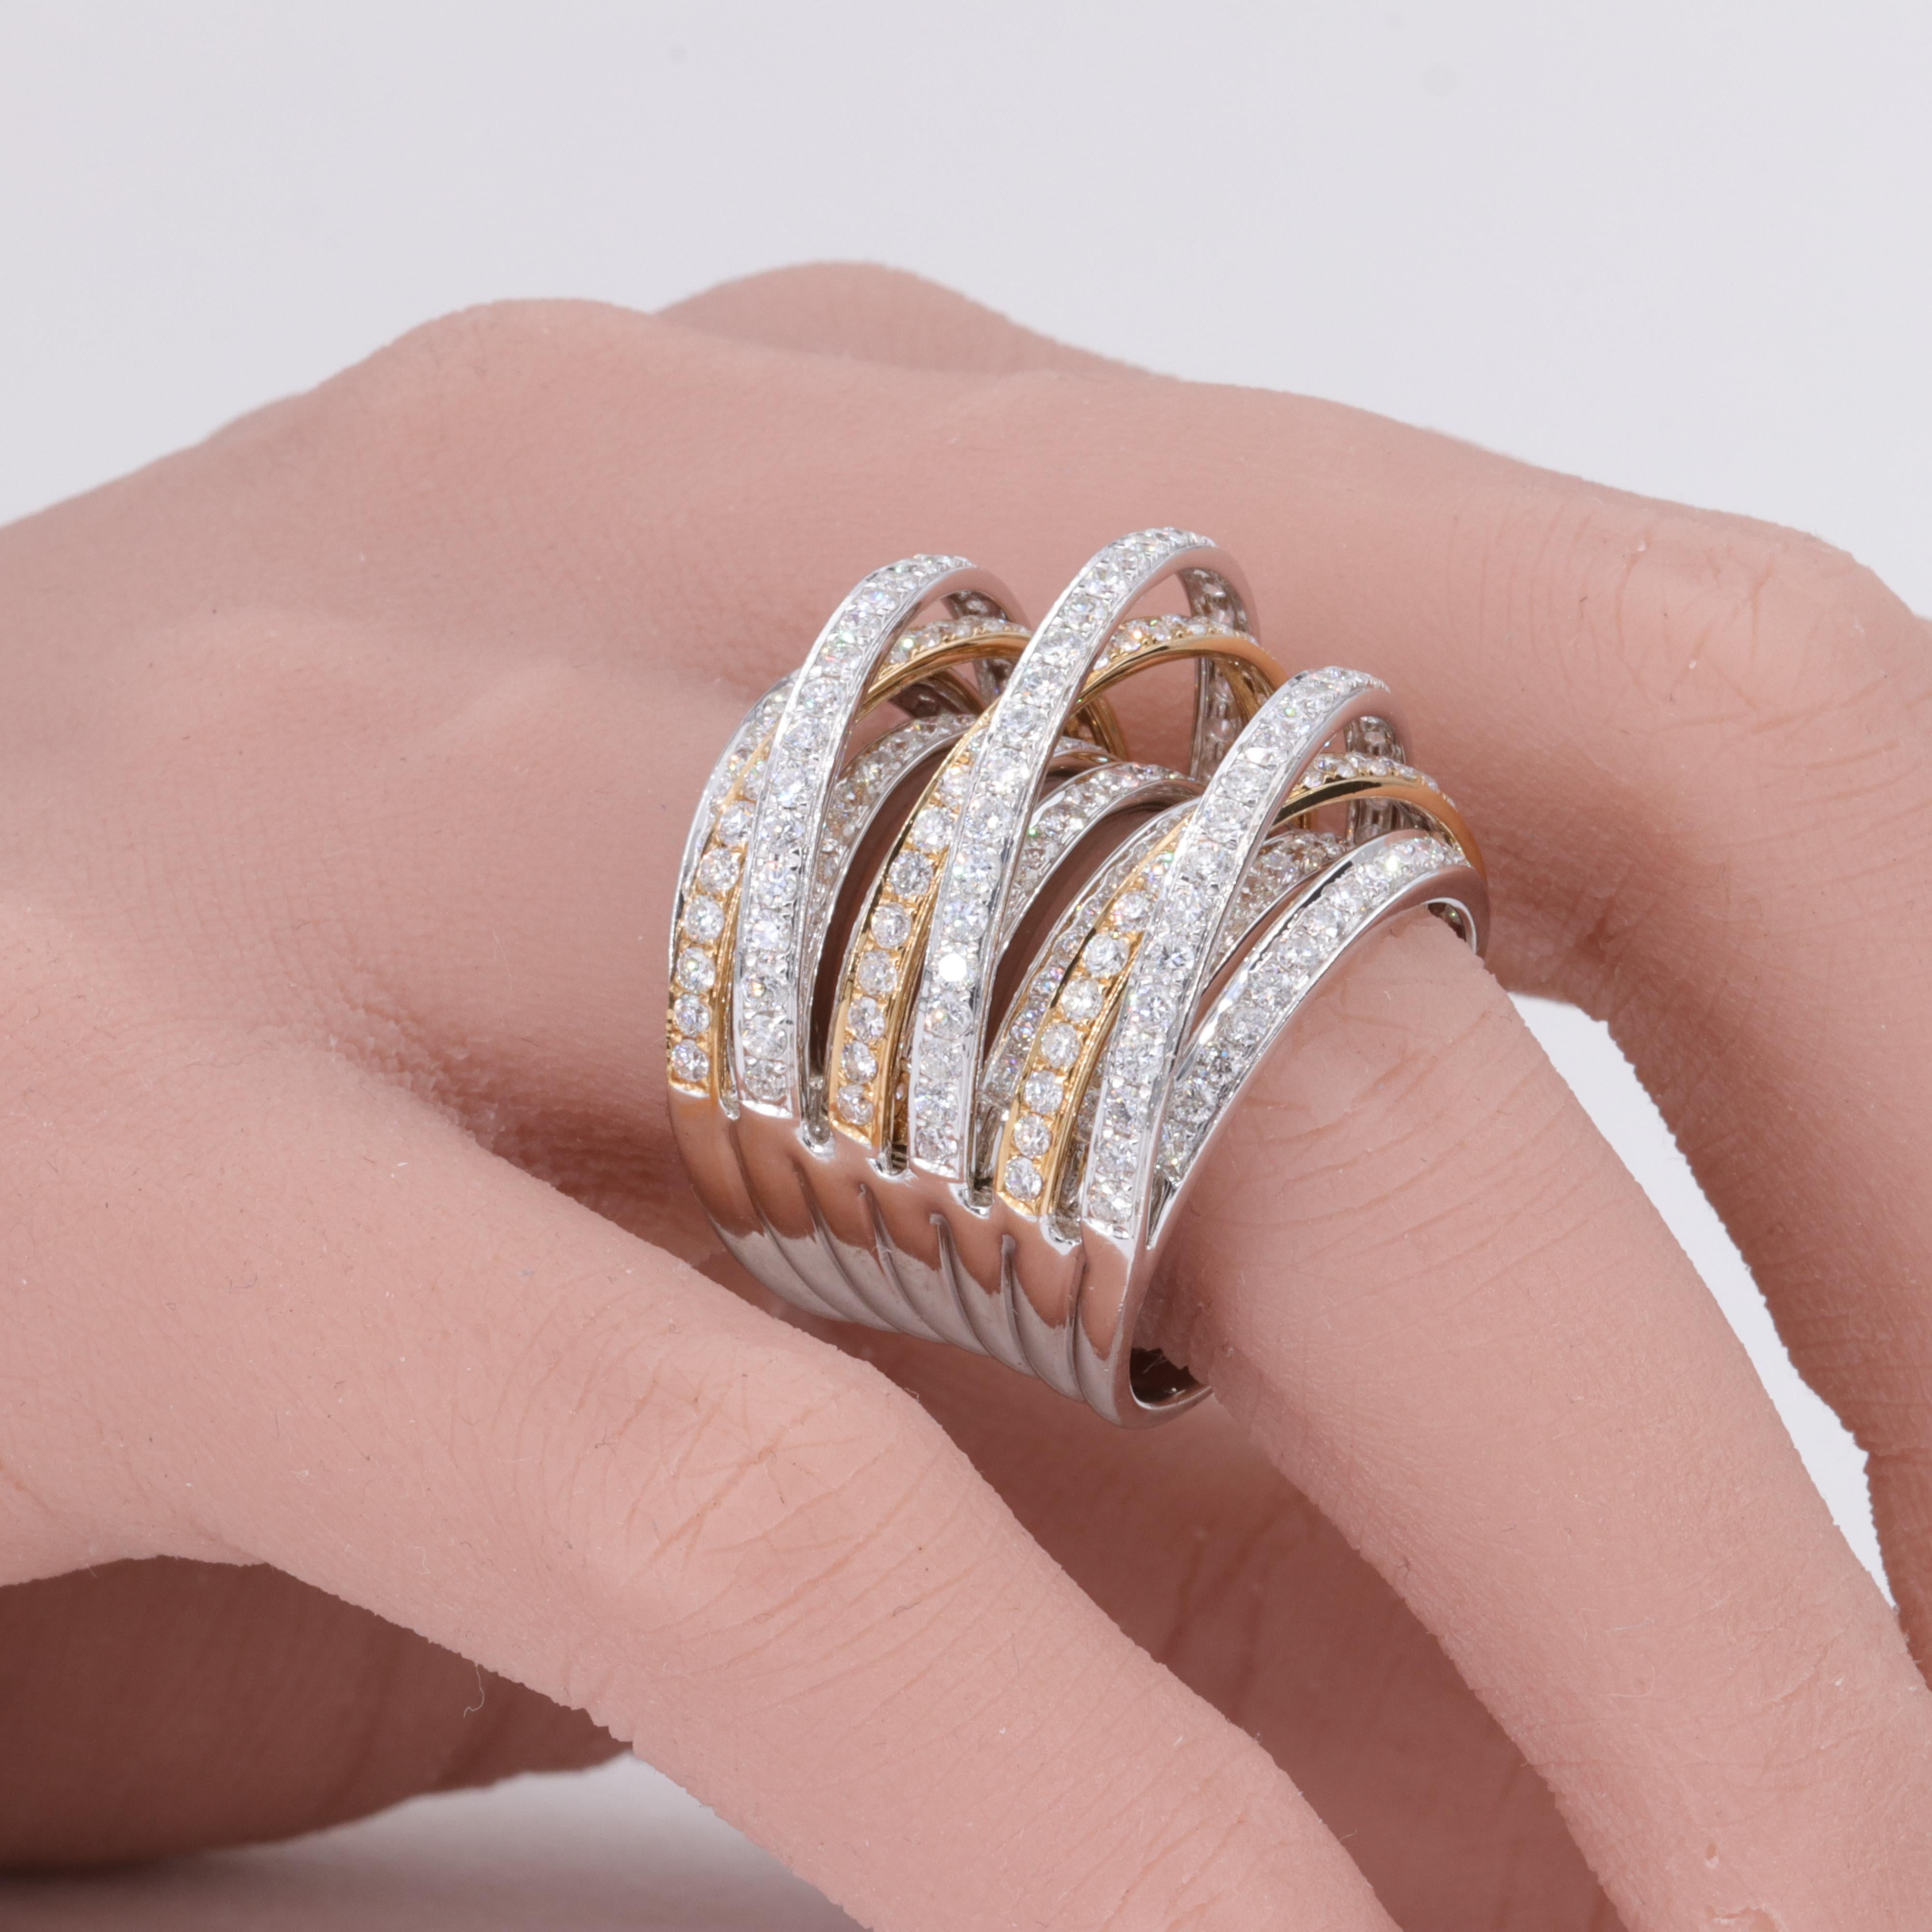 4.52 Carat Diamond Multi Row 18 Karat White & Yellow Gold Cocktail Ring Band

Diamonds: 

Weight - 236 Stones - 4.52 Carats 
Colors - D to G
Clarities - VS1 to SI1

Ring:

Metal - 18 Karat Yellow & White Gold
Weight - 18.9 Grams 
Length - 1